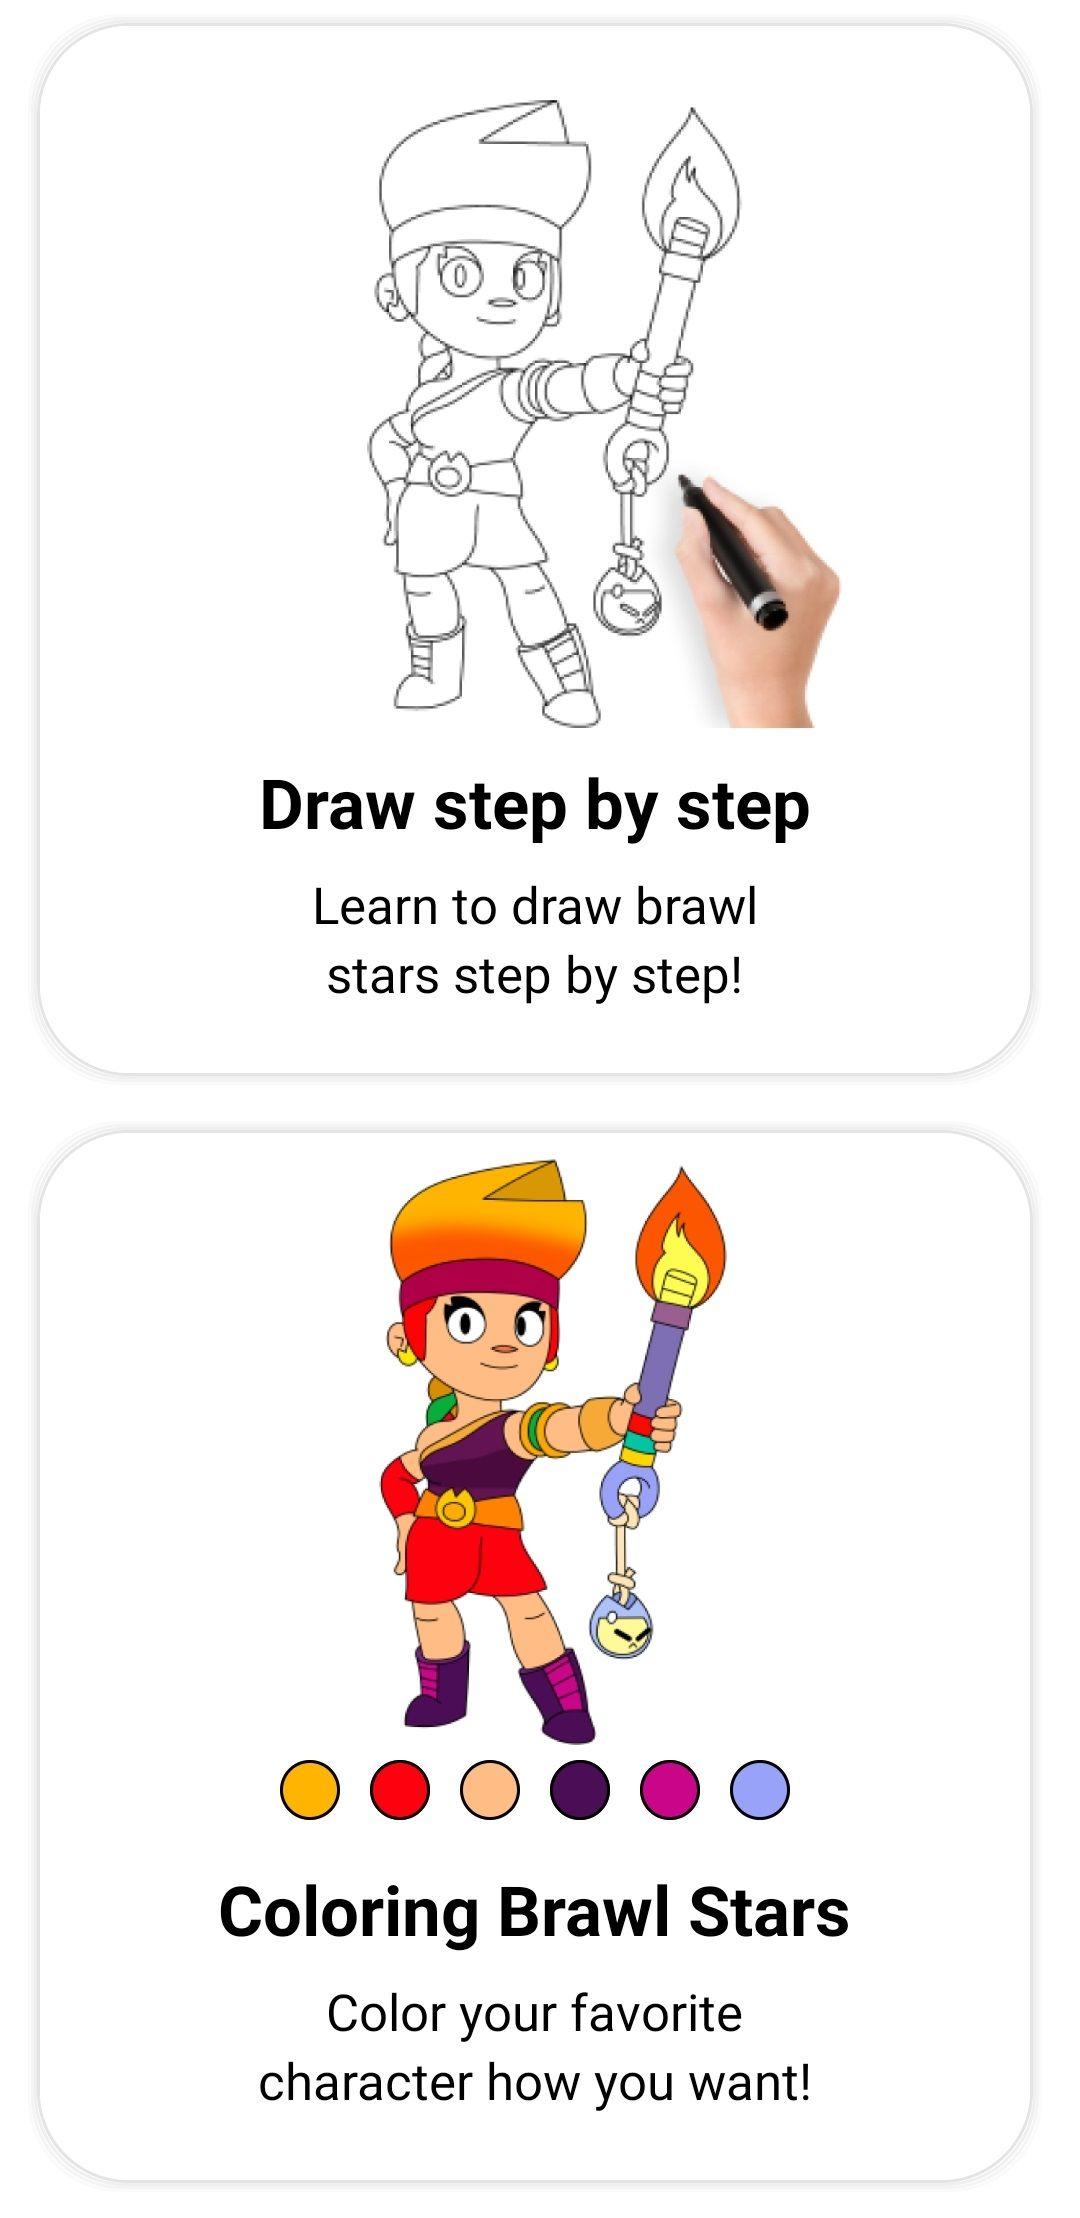 Coloring Brawl Stars How To Draw Brawl Stars For Android Apk Download - drawls brawl stars